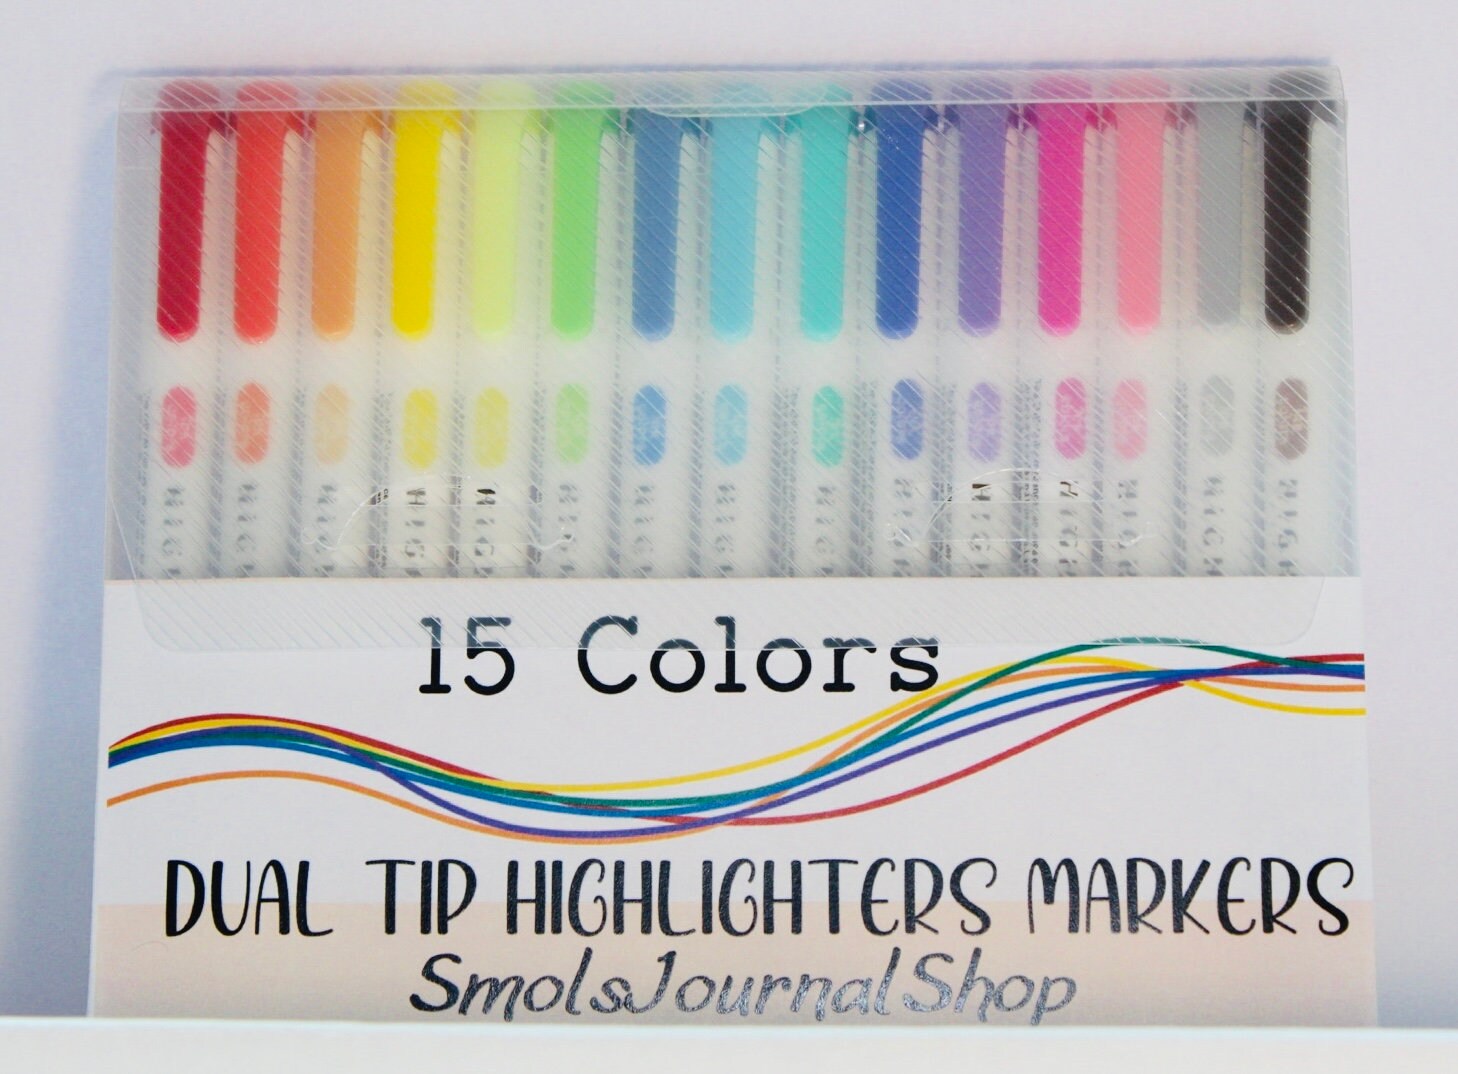 Studio 71 Bold Primary Color Alcohol Markers, Set of 6, With